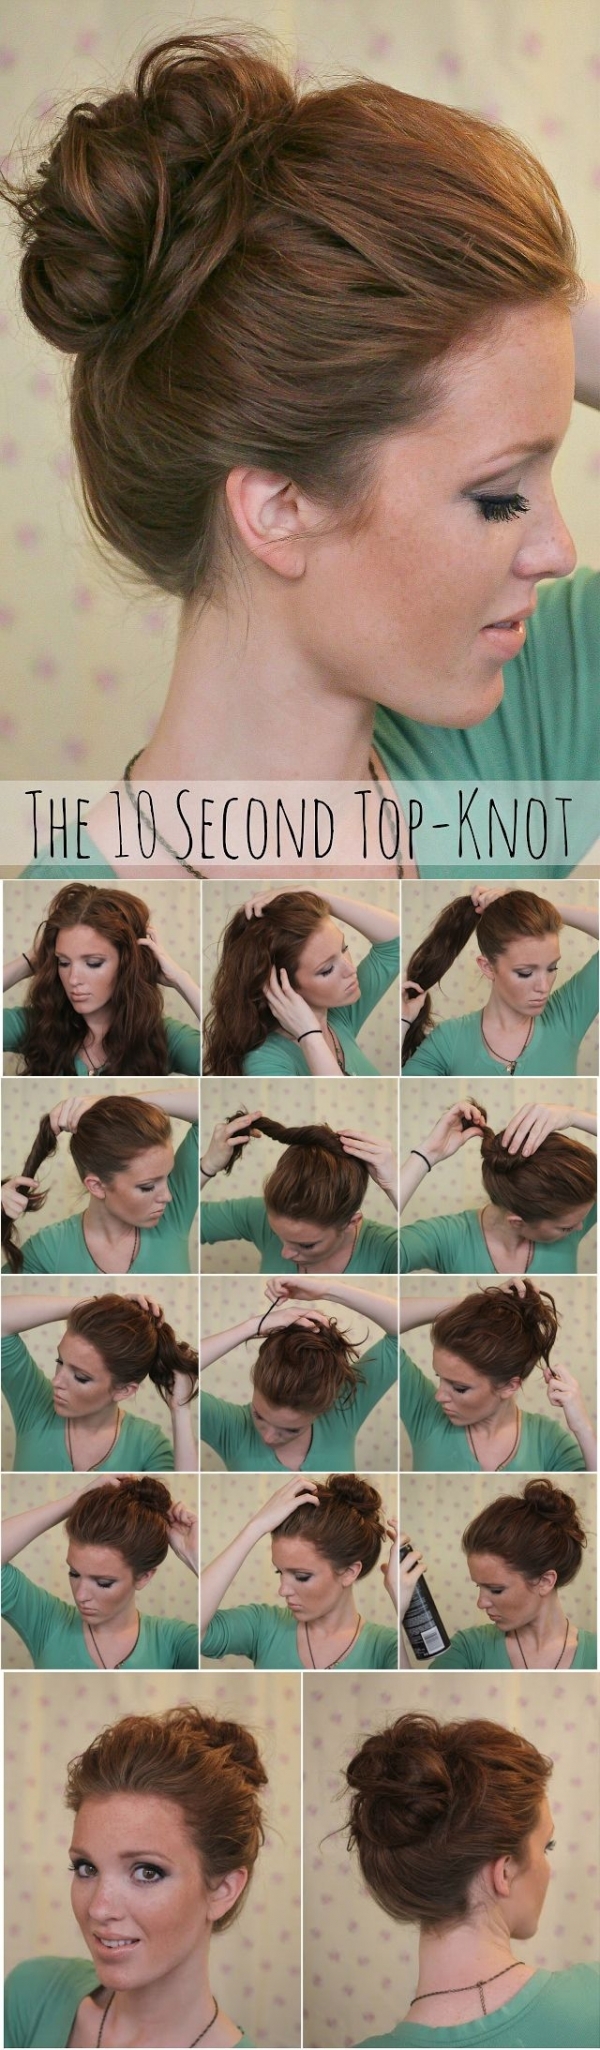 15 Simple Yet Stunning Hairstyle Tutorials for Lazy Women | Styles Weekly